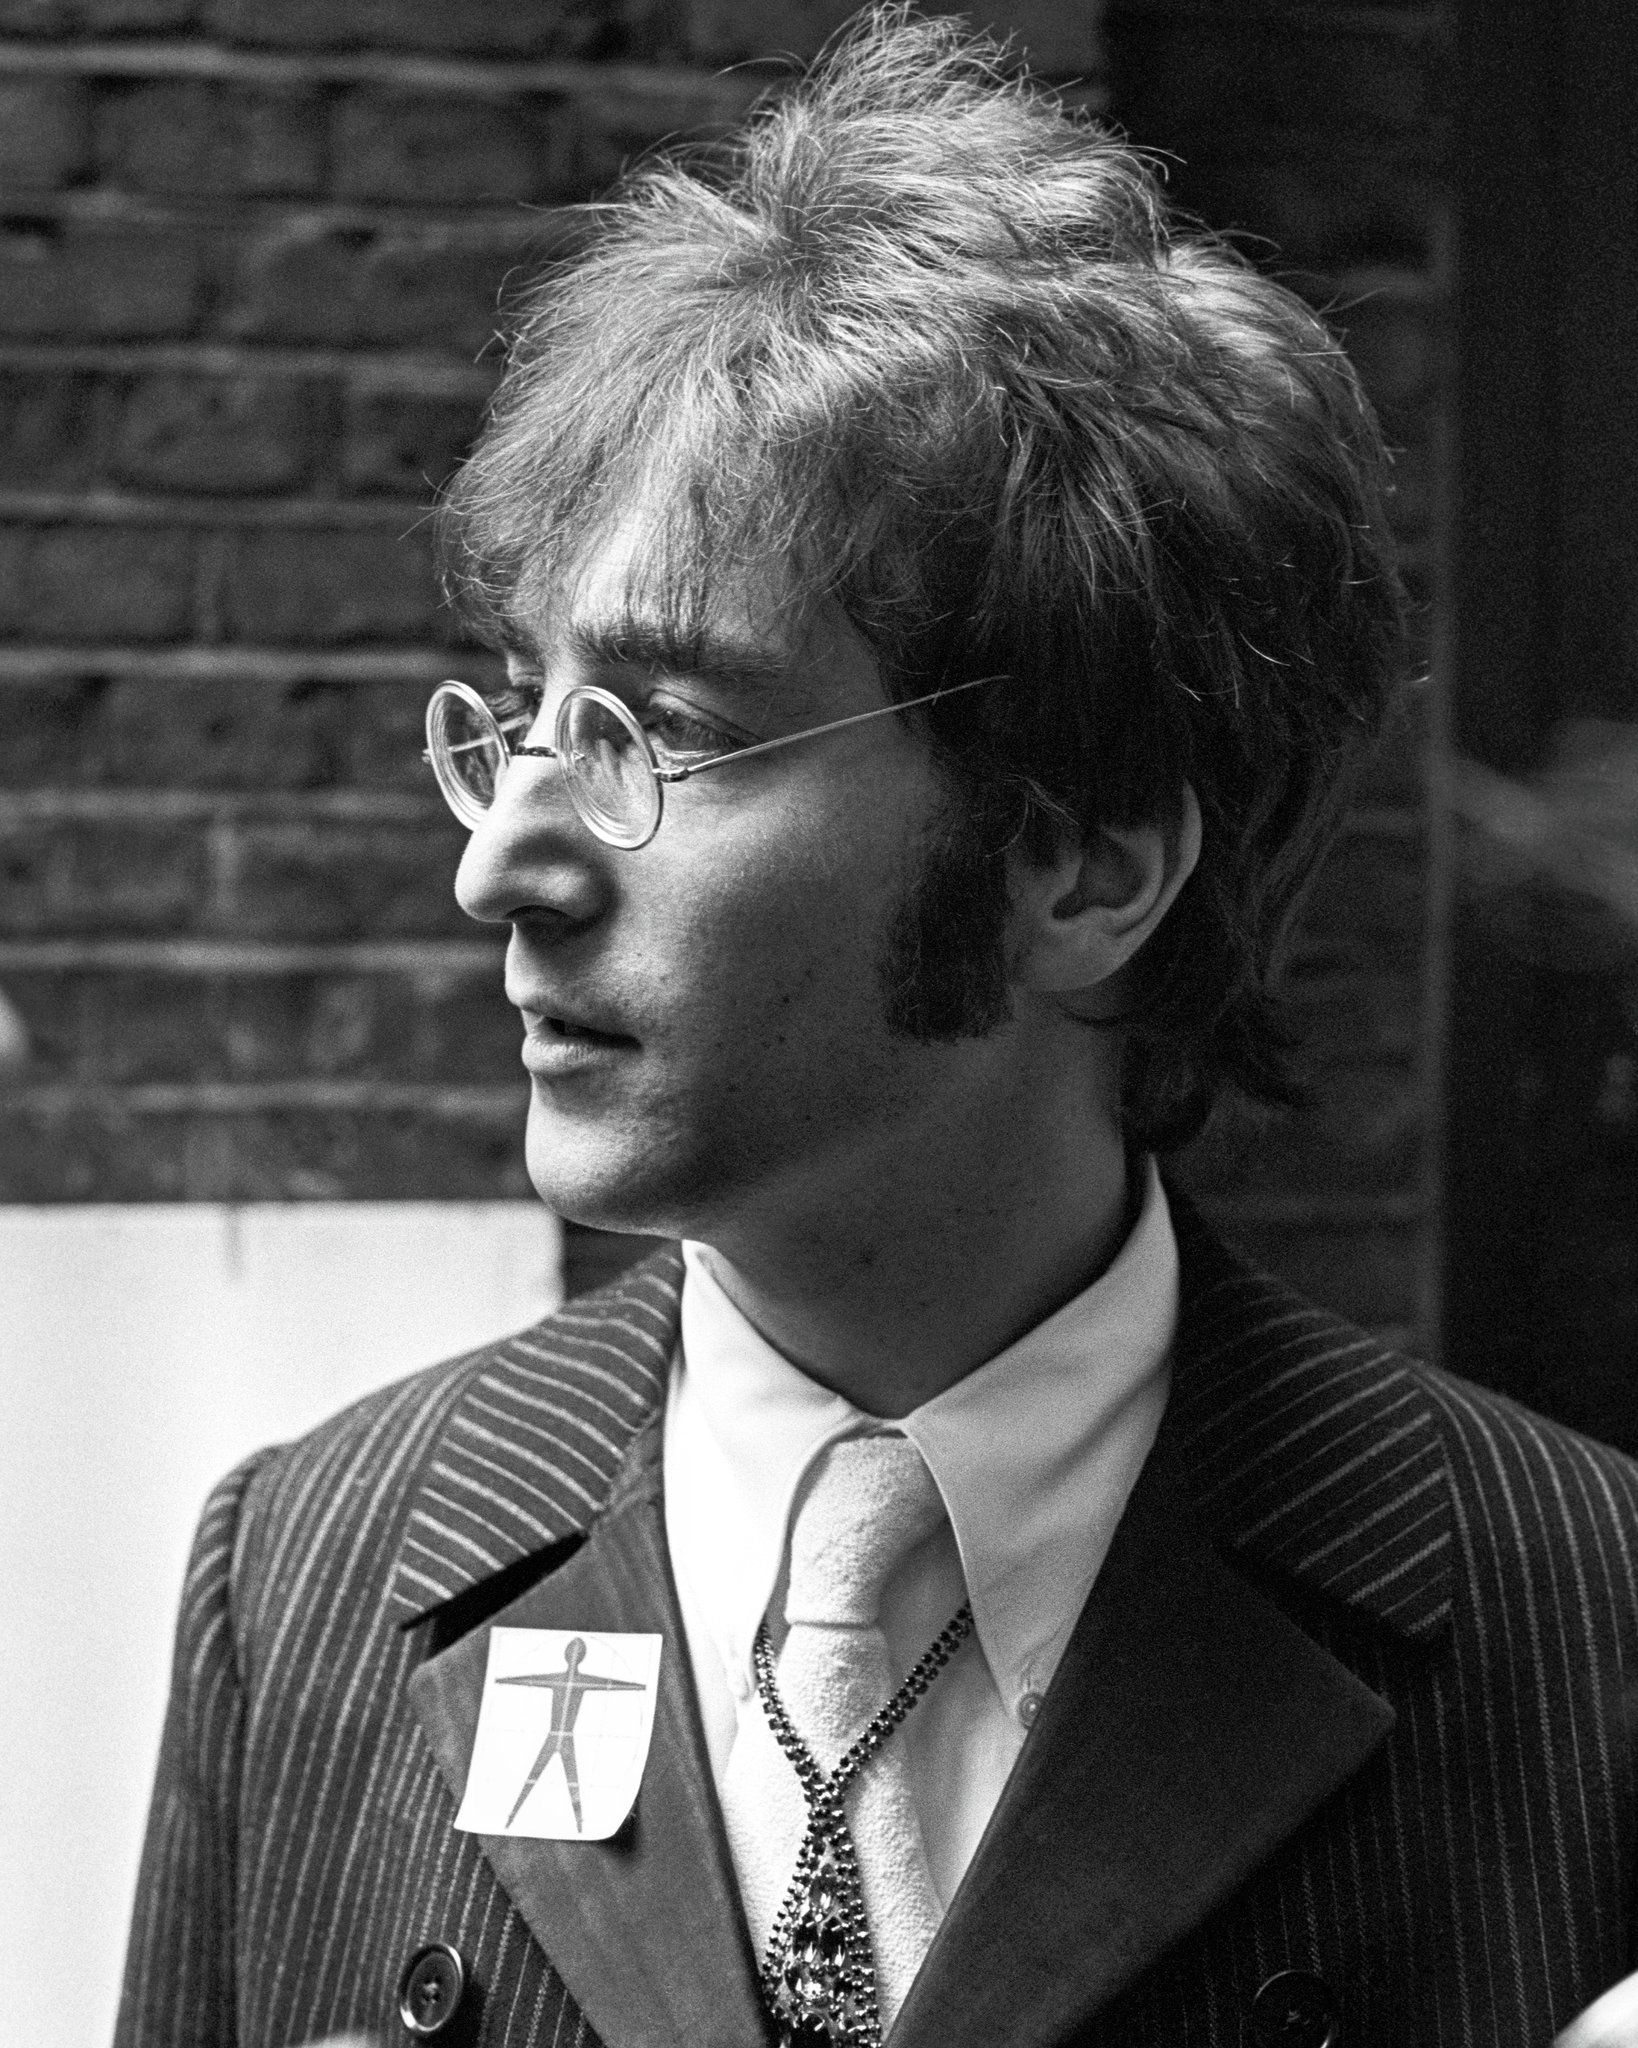 Happy birthday to John Lennon who would have been 80 today. 